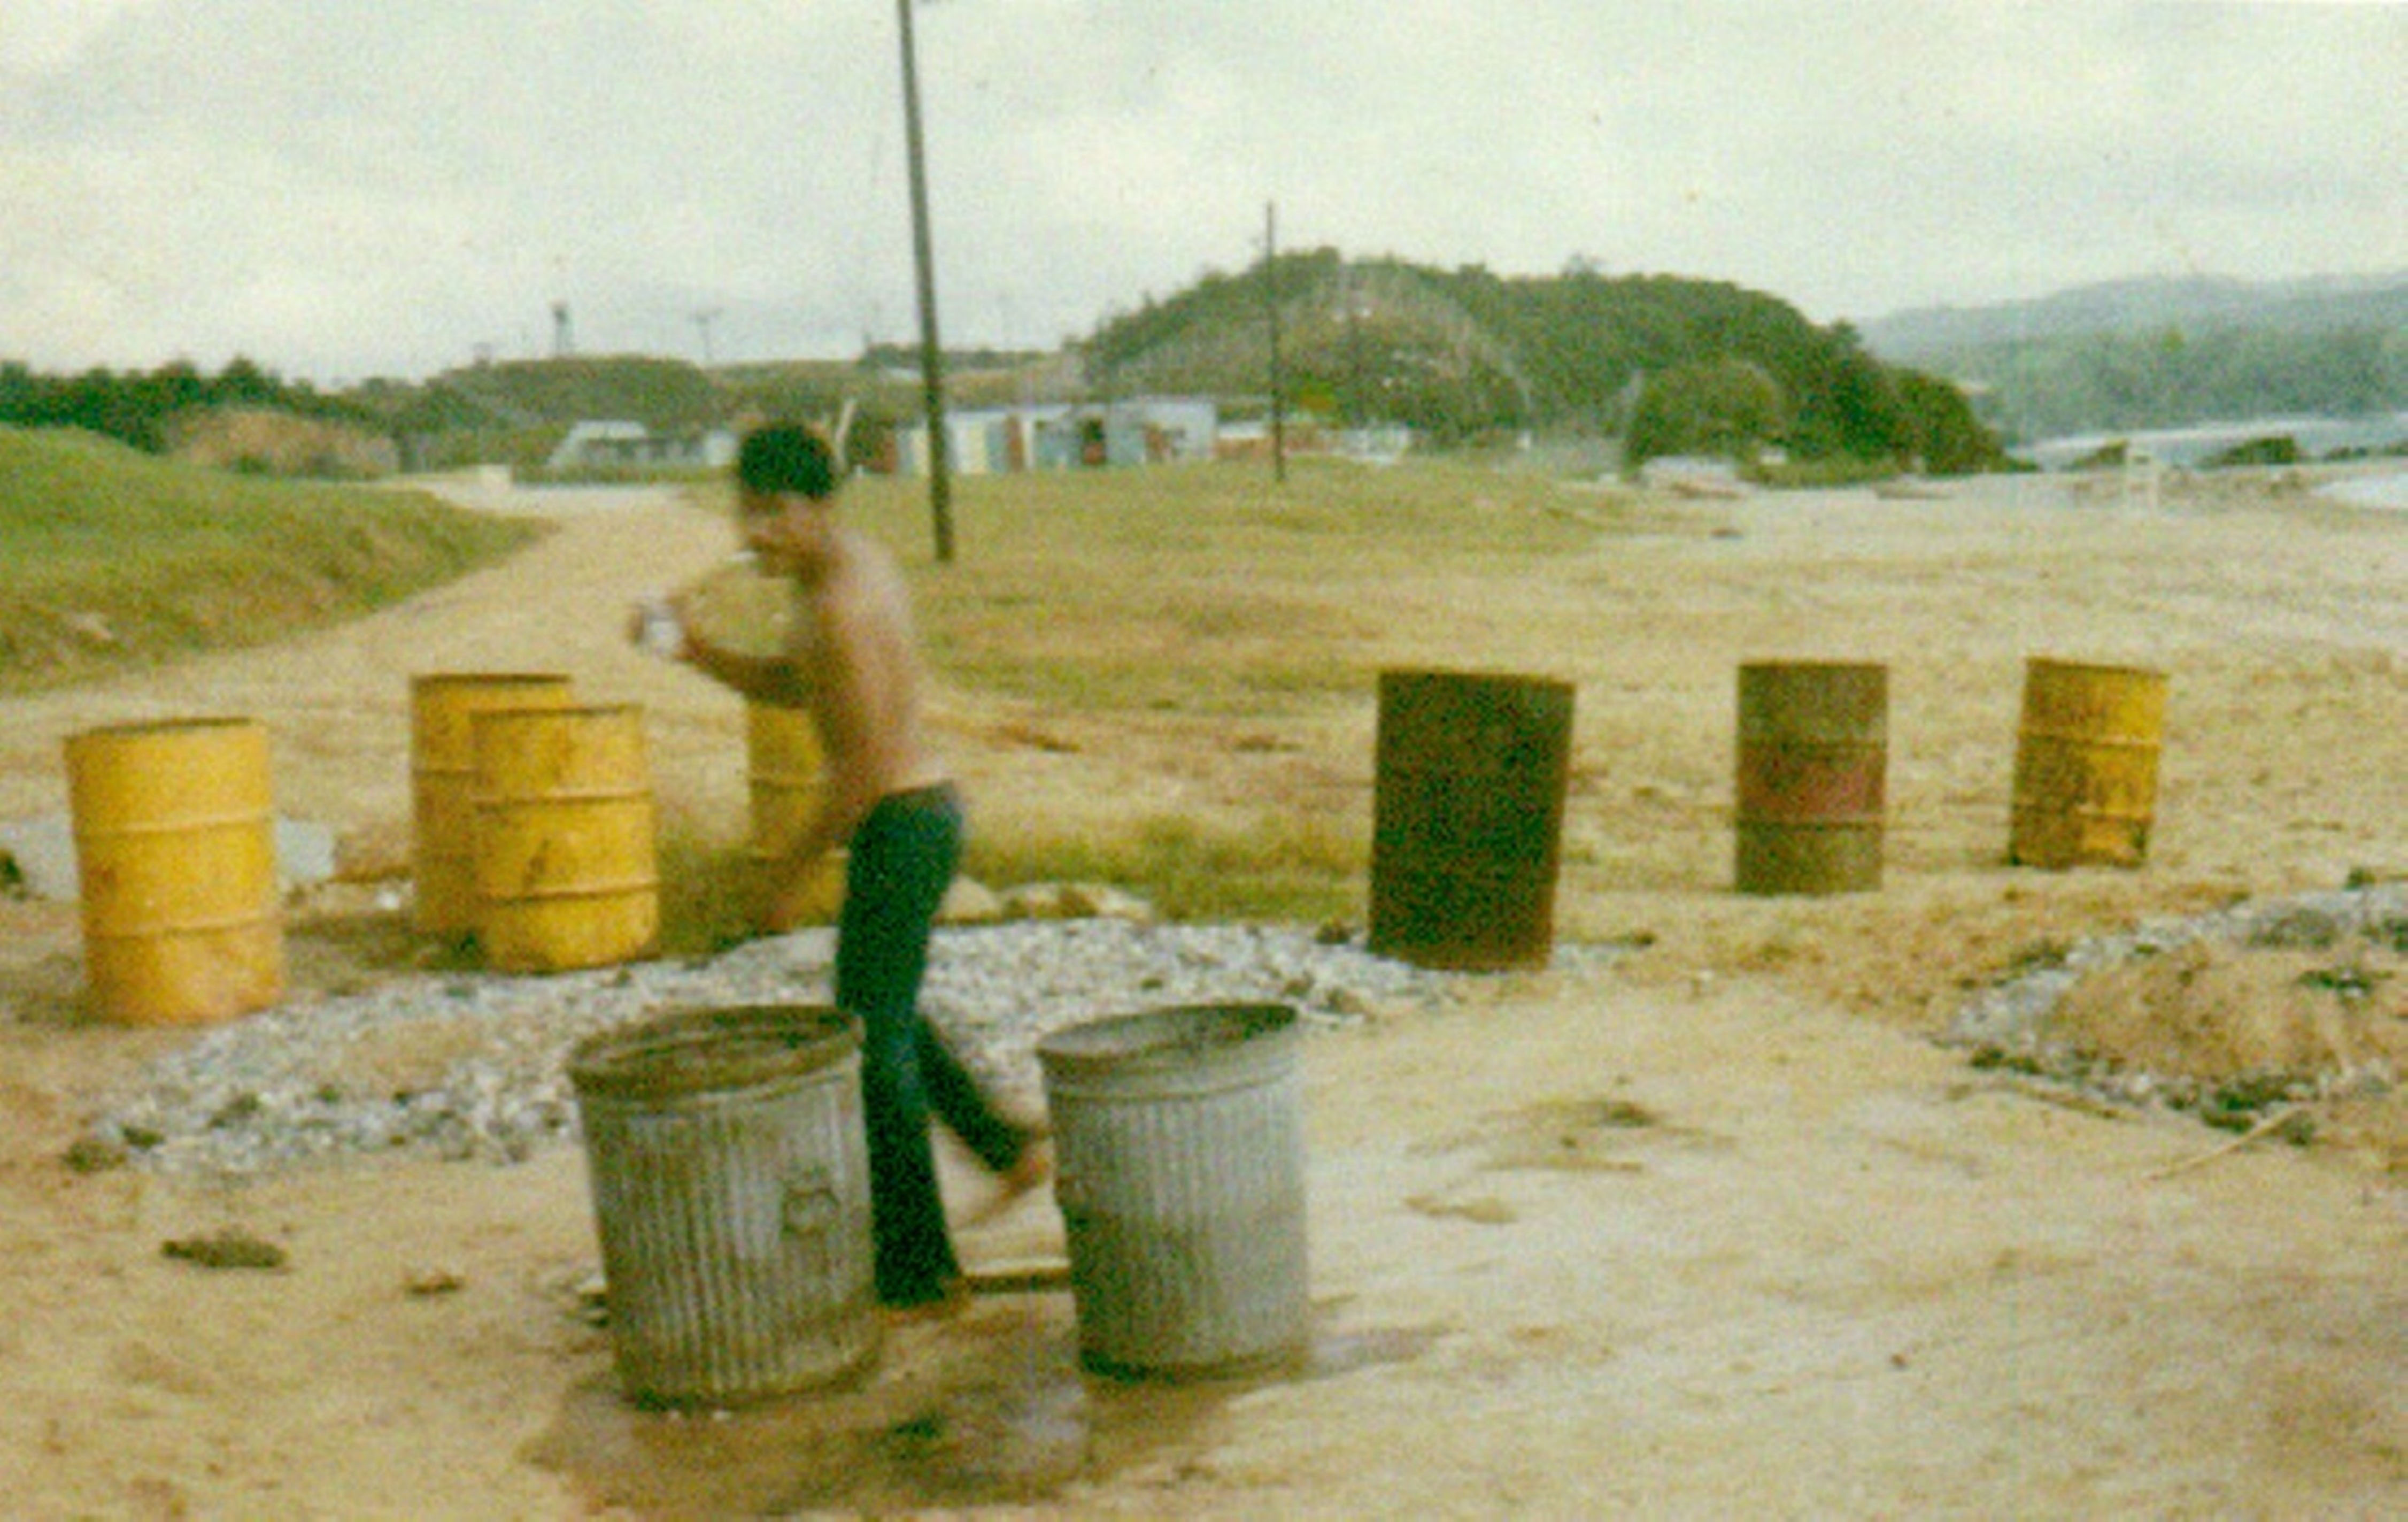 U.S. Marine Scott Parton stands among barrels including one, second from right, that he says contained Agent Orange, at Camp Schwab in 1971. | COURTESY OF SCOTT PARTON